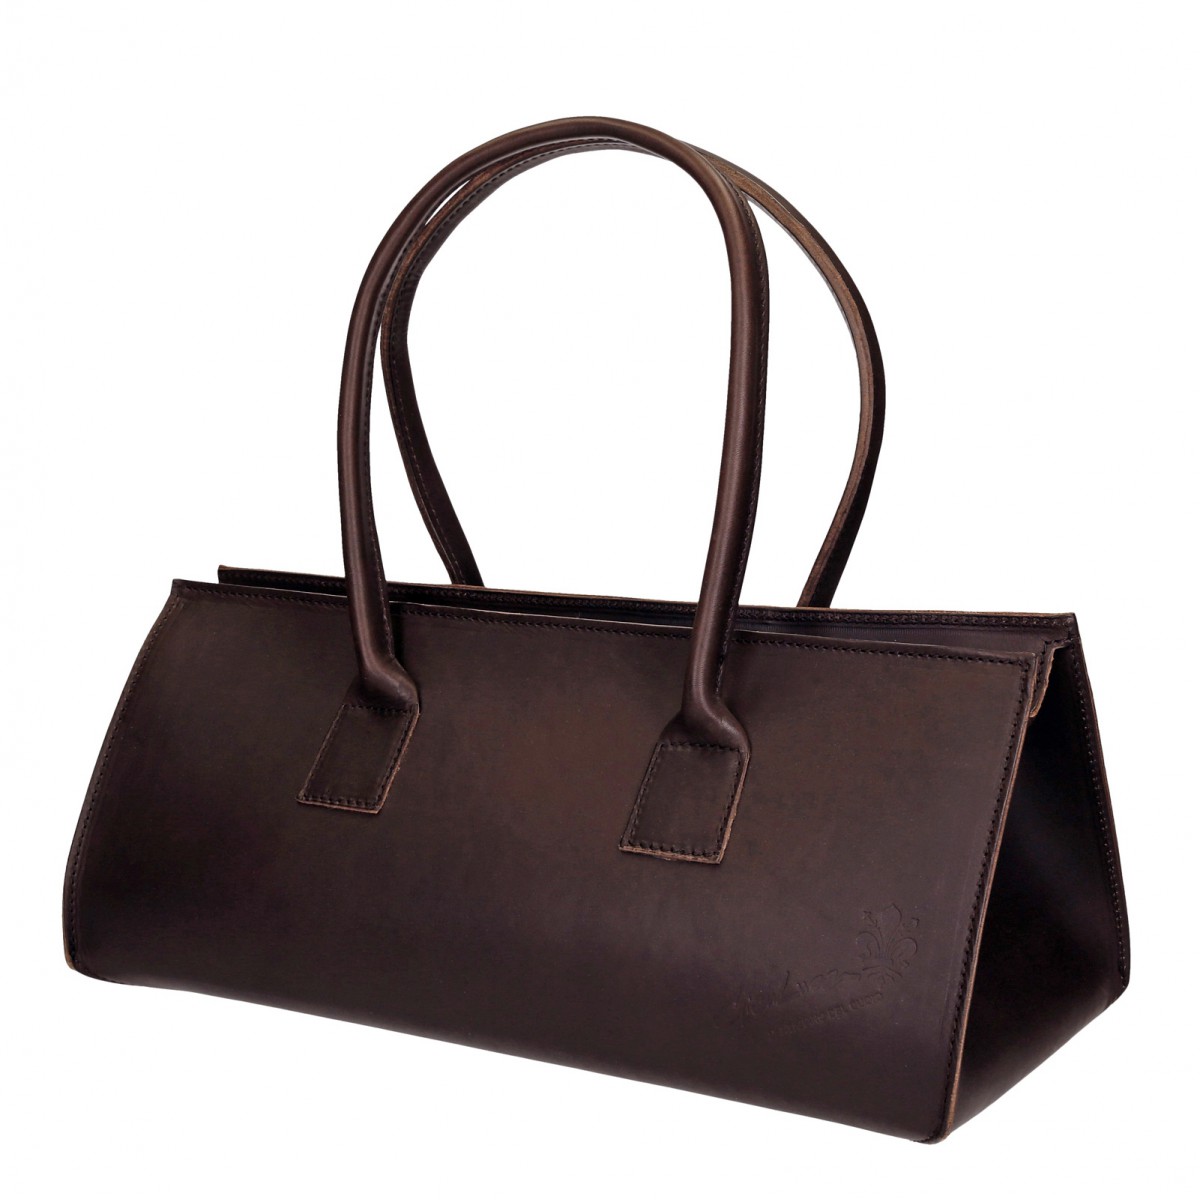 Handmade brown leather large handbag for women | Gianluca - The leather craftsman